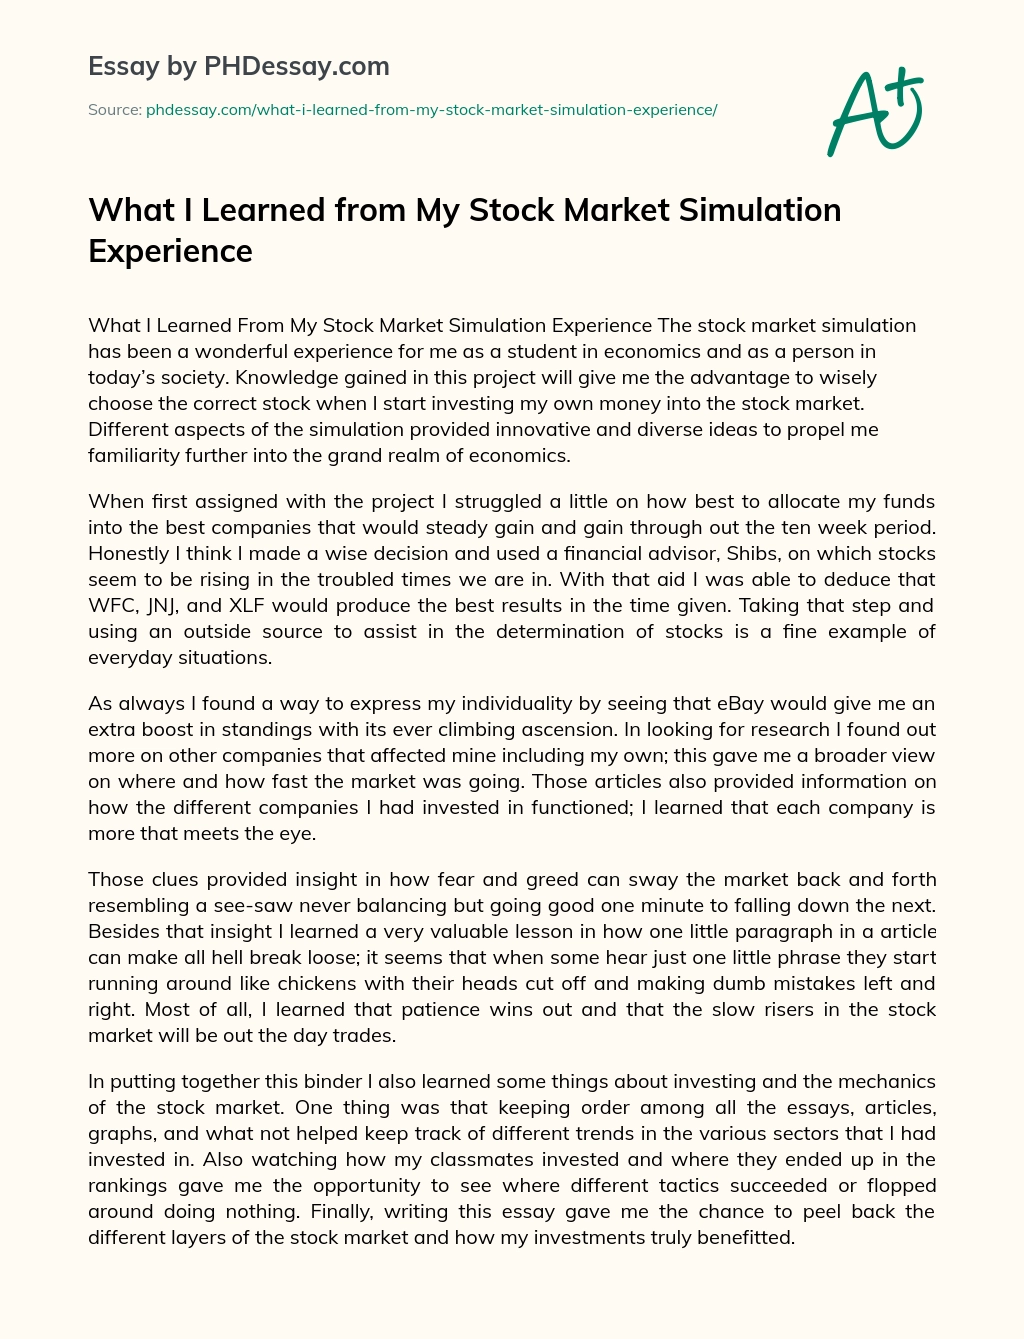 What I Learned from My Stock Market Simulation Experience essay